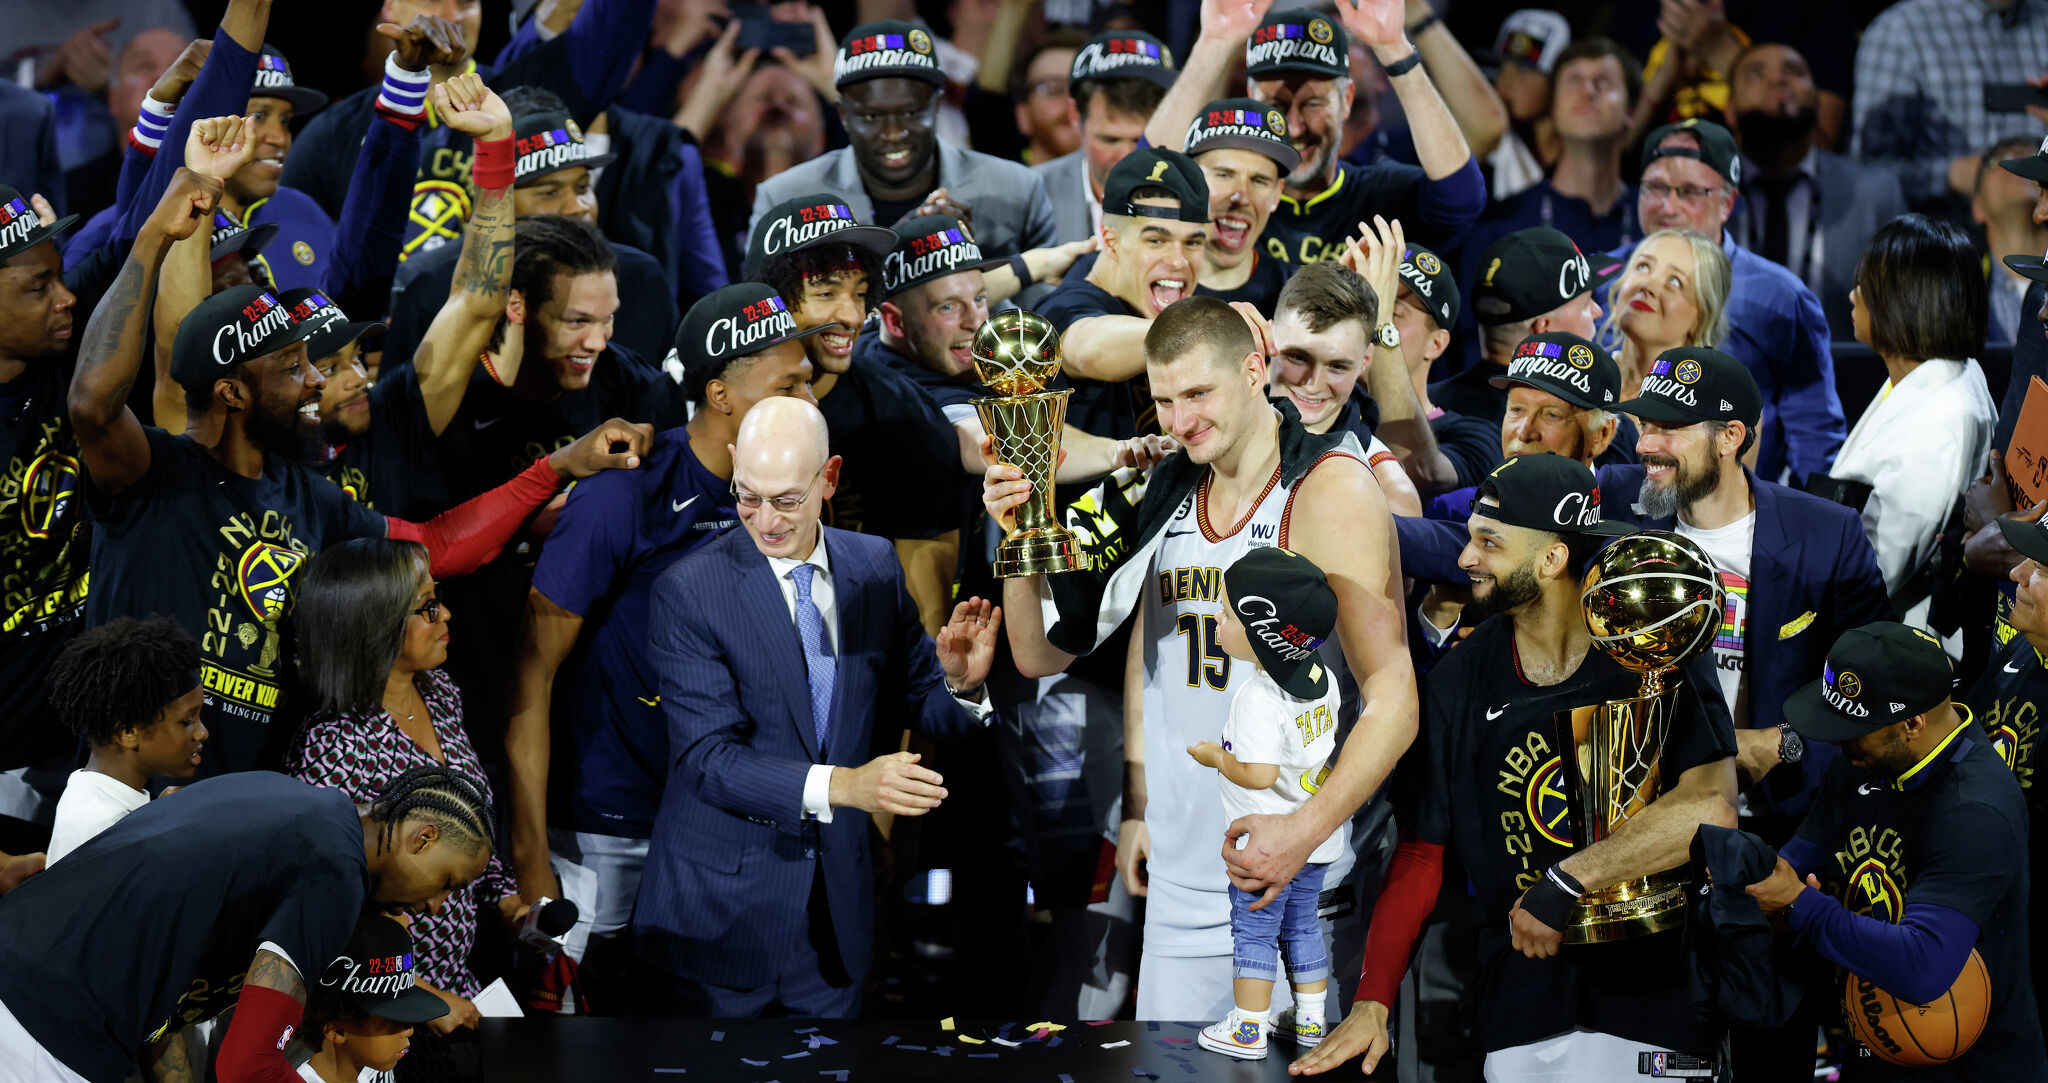 The NBA Finals are set: It's the Heat and the Nuggets for the Larry O'Brien  Trophy